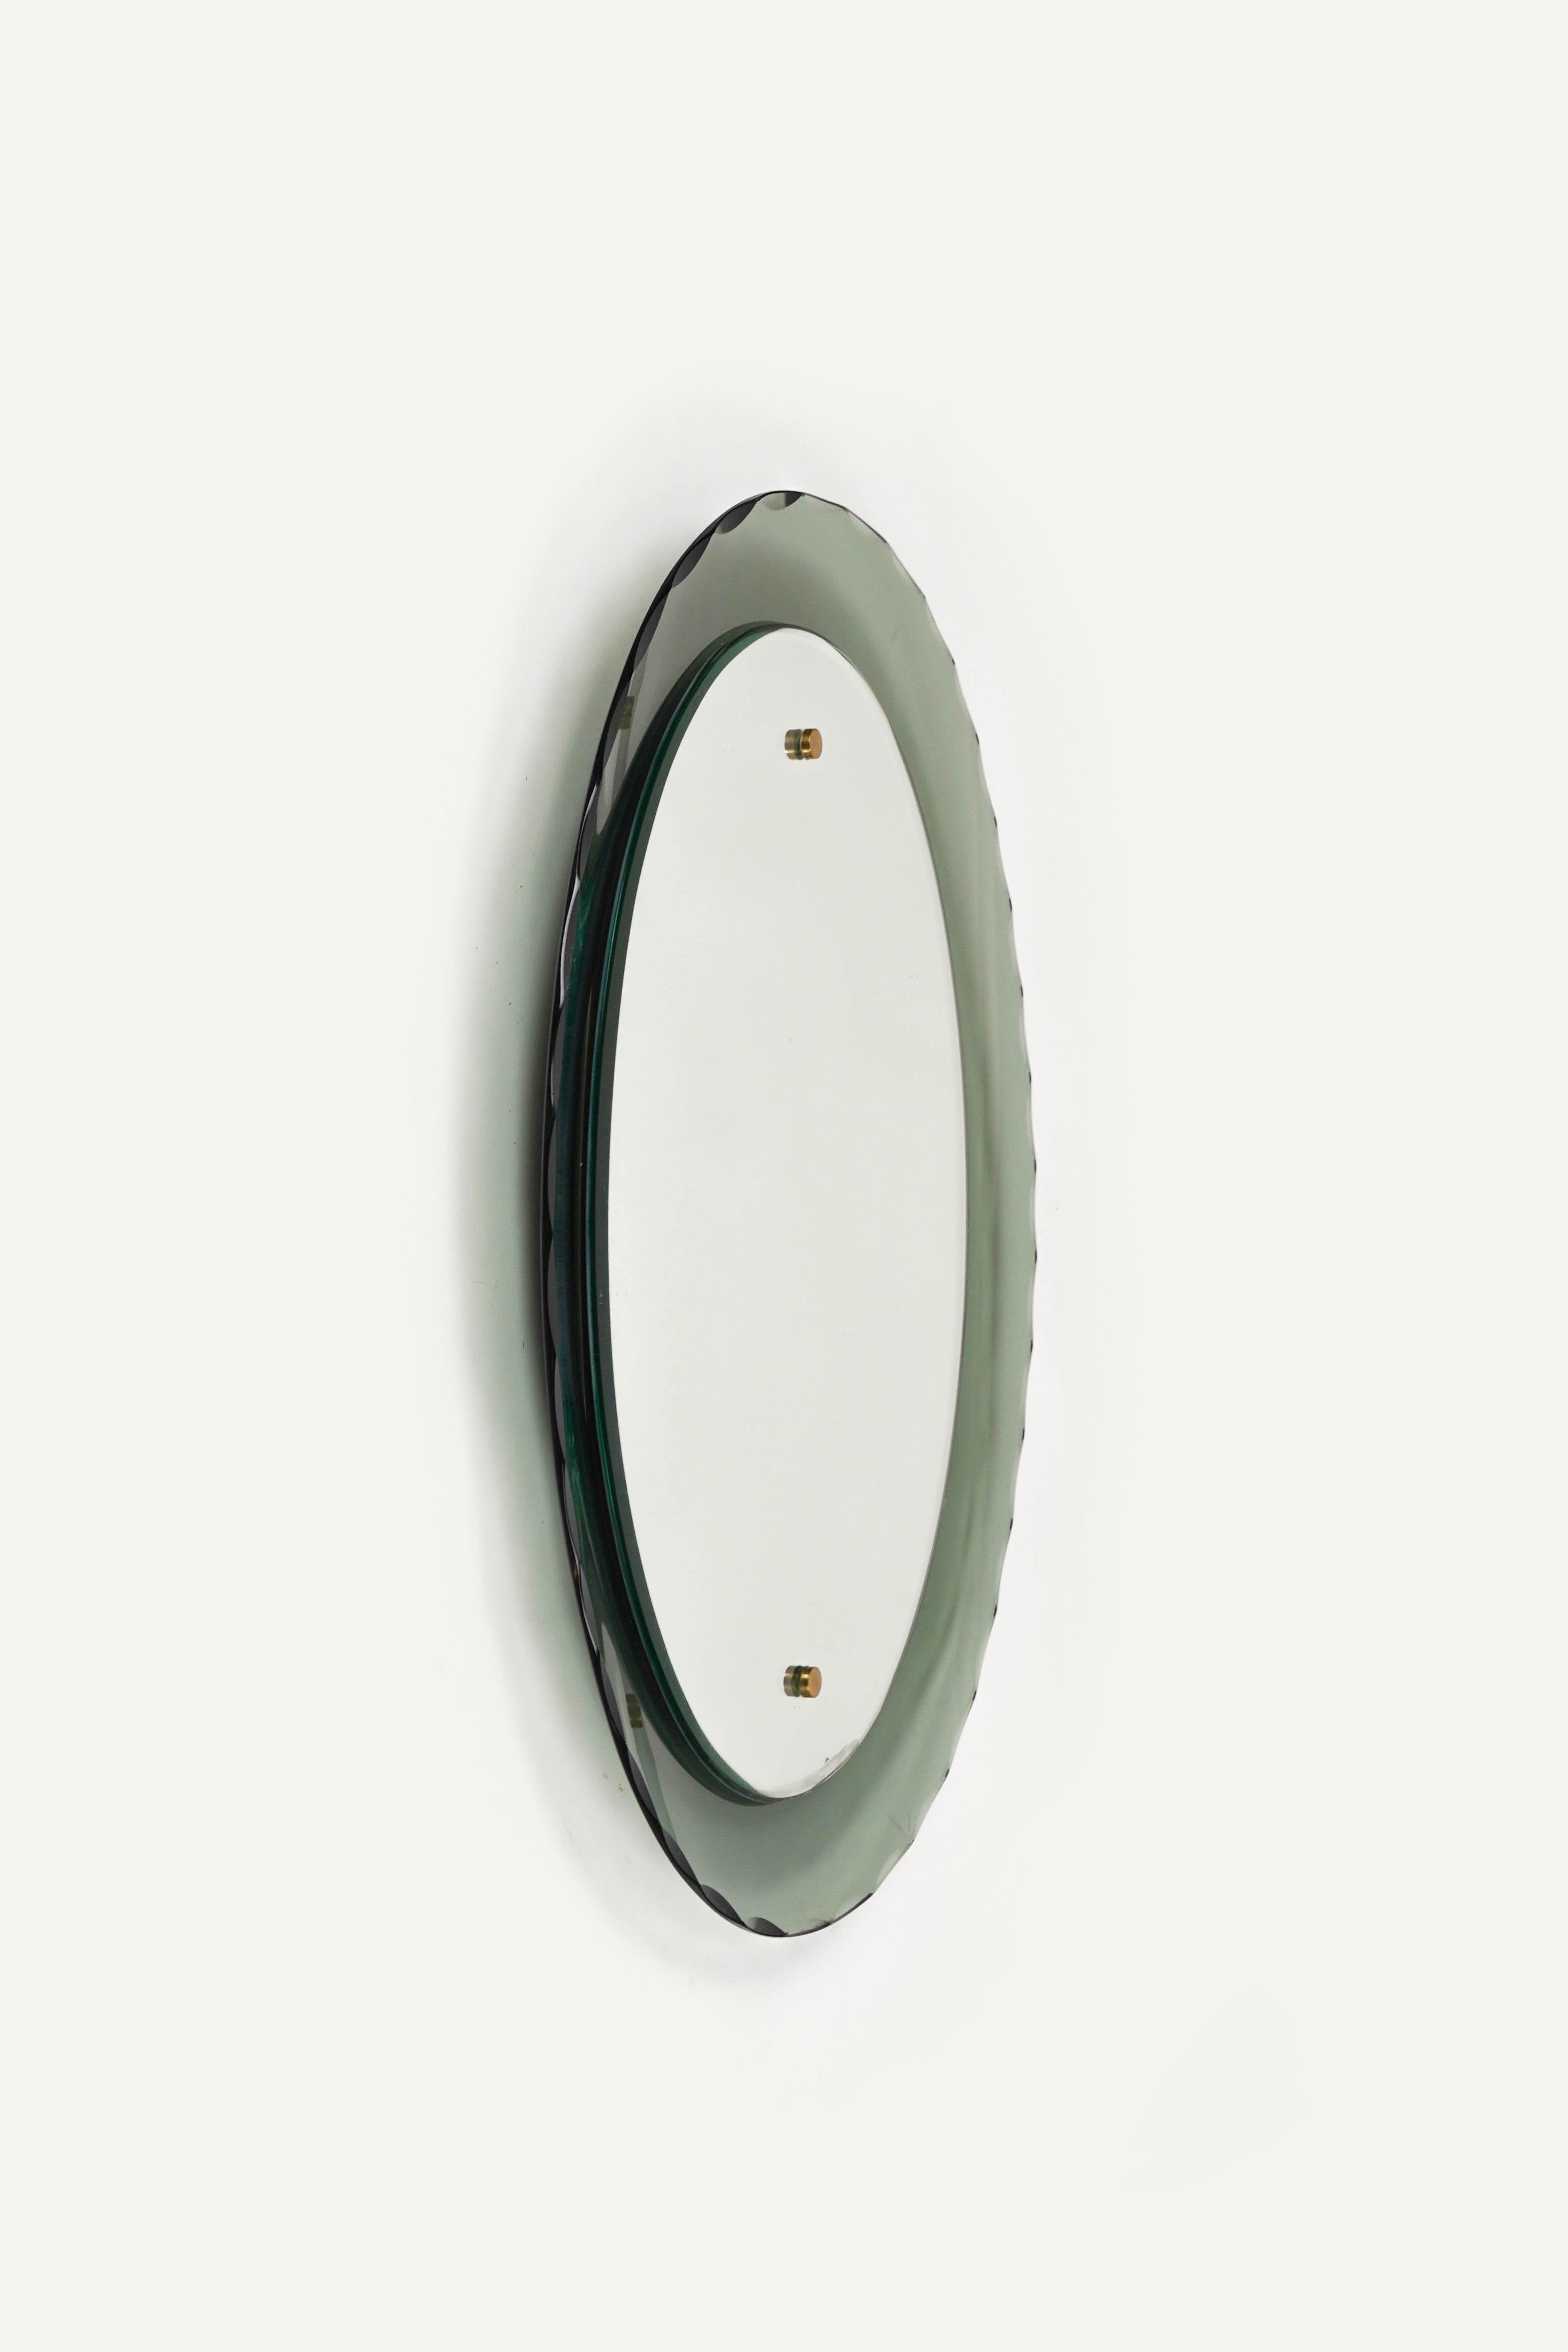 Mid-Century Modern Midcentury Oval Wall Mirror whit Smoked Glass Frame by Cristal Arte, Italy 1960s For Sale